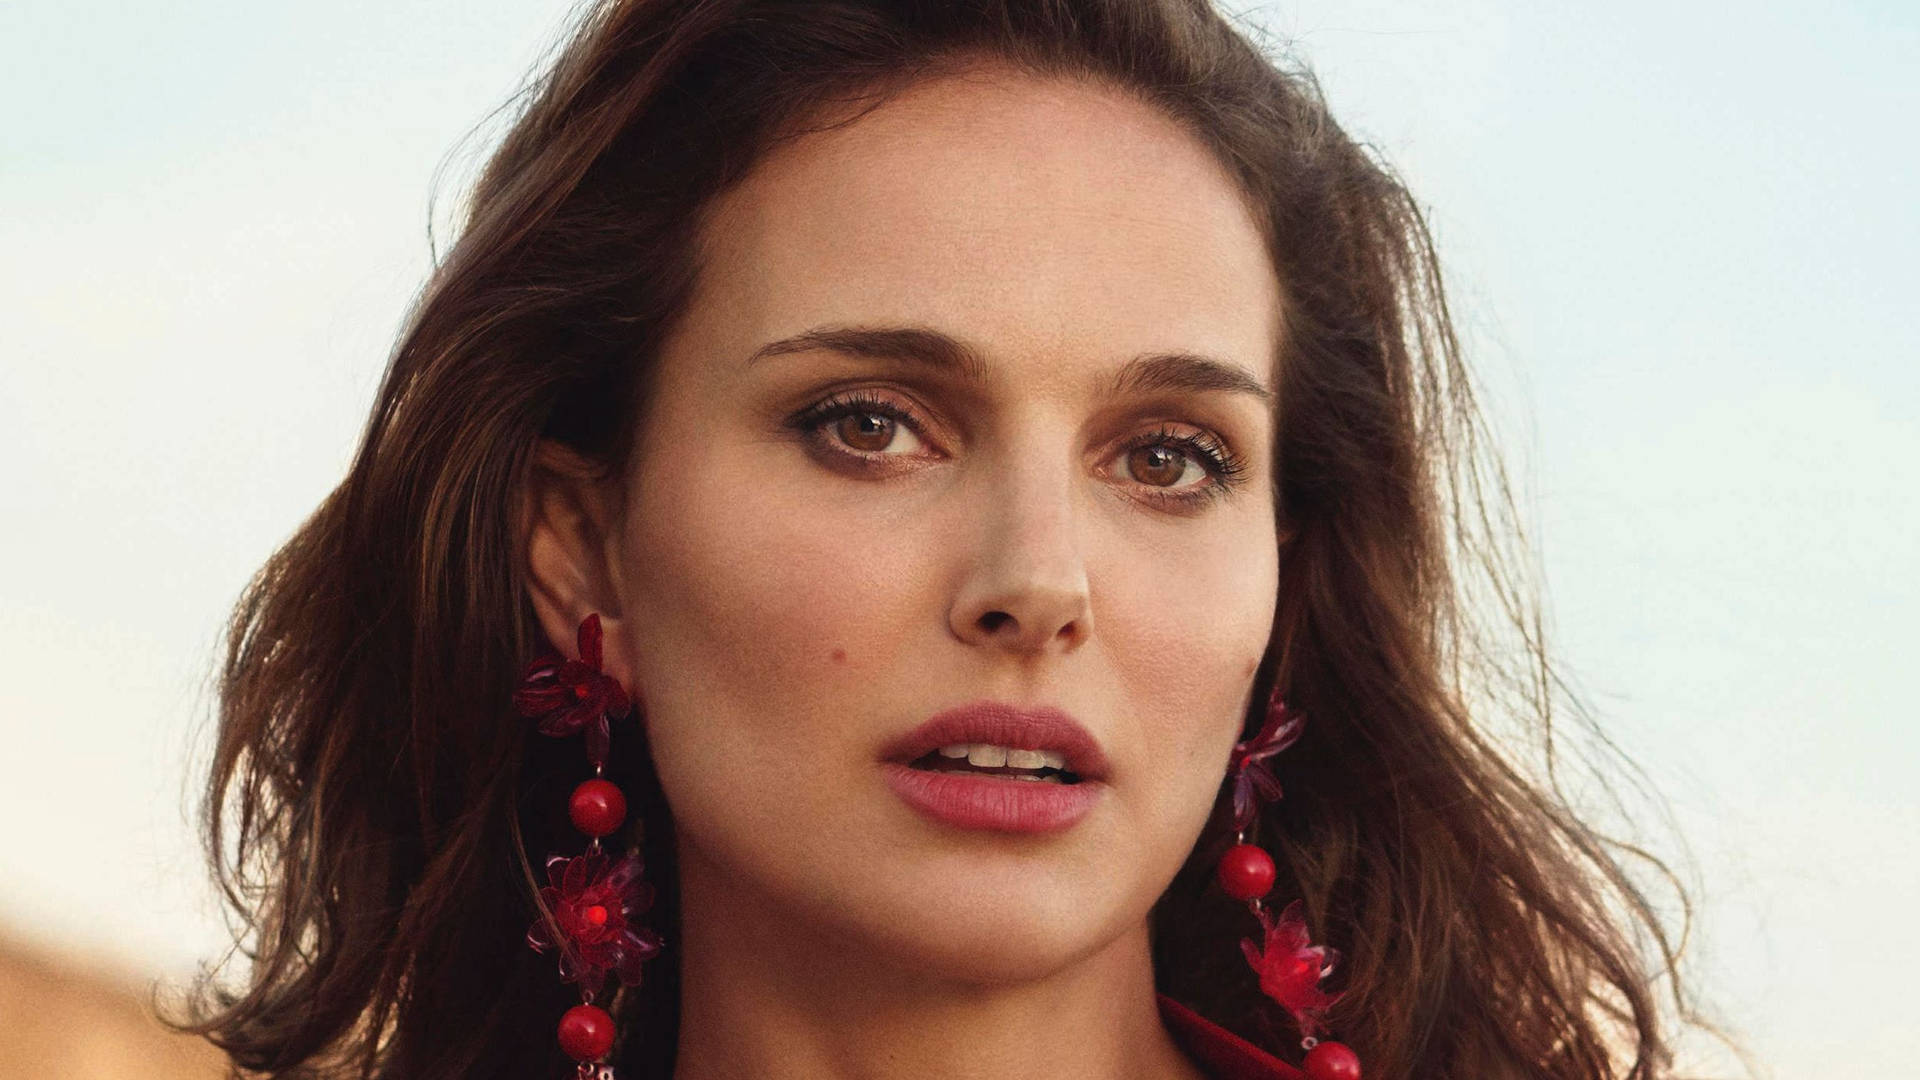 Natalie Portman With Red Earrings